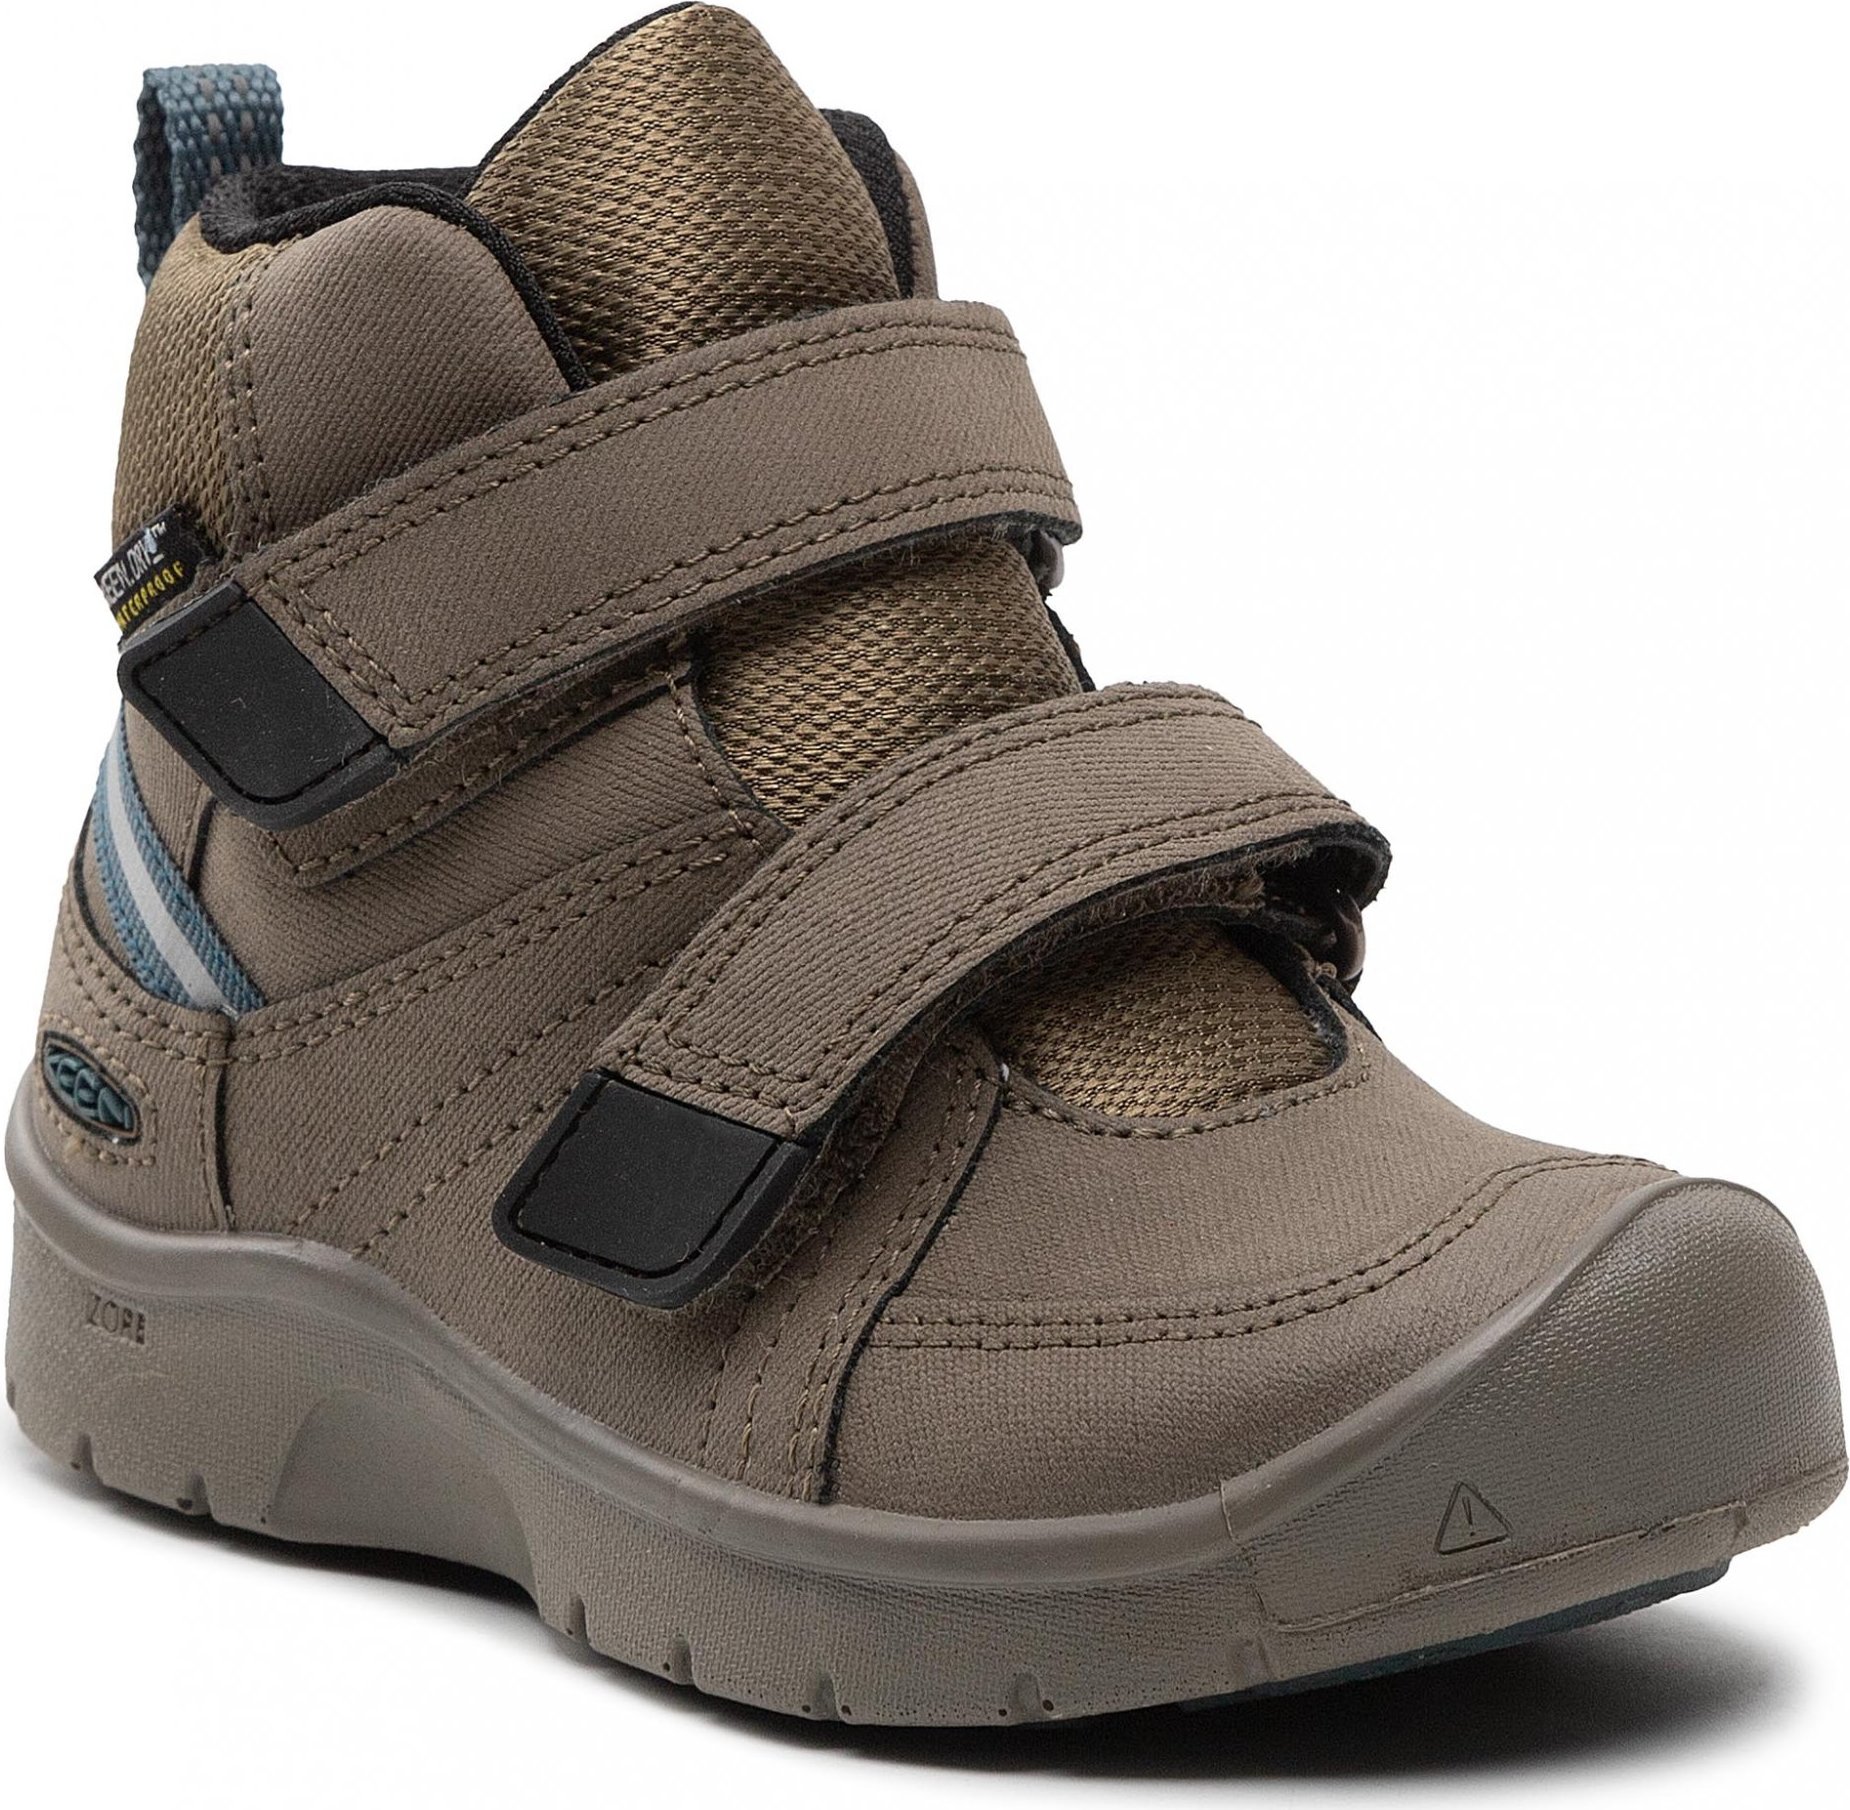 Keen Hikeport 2 Mid Strap Wp 1023830